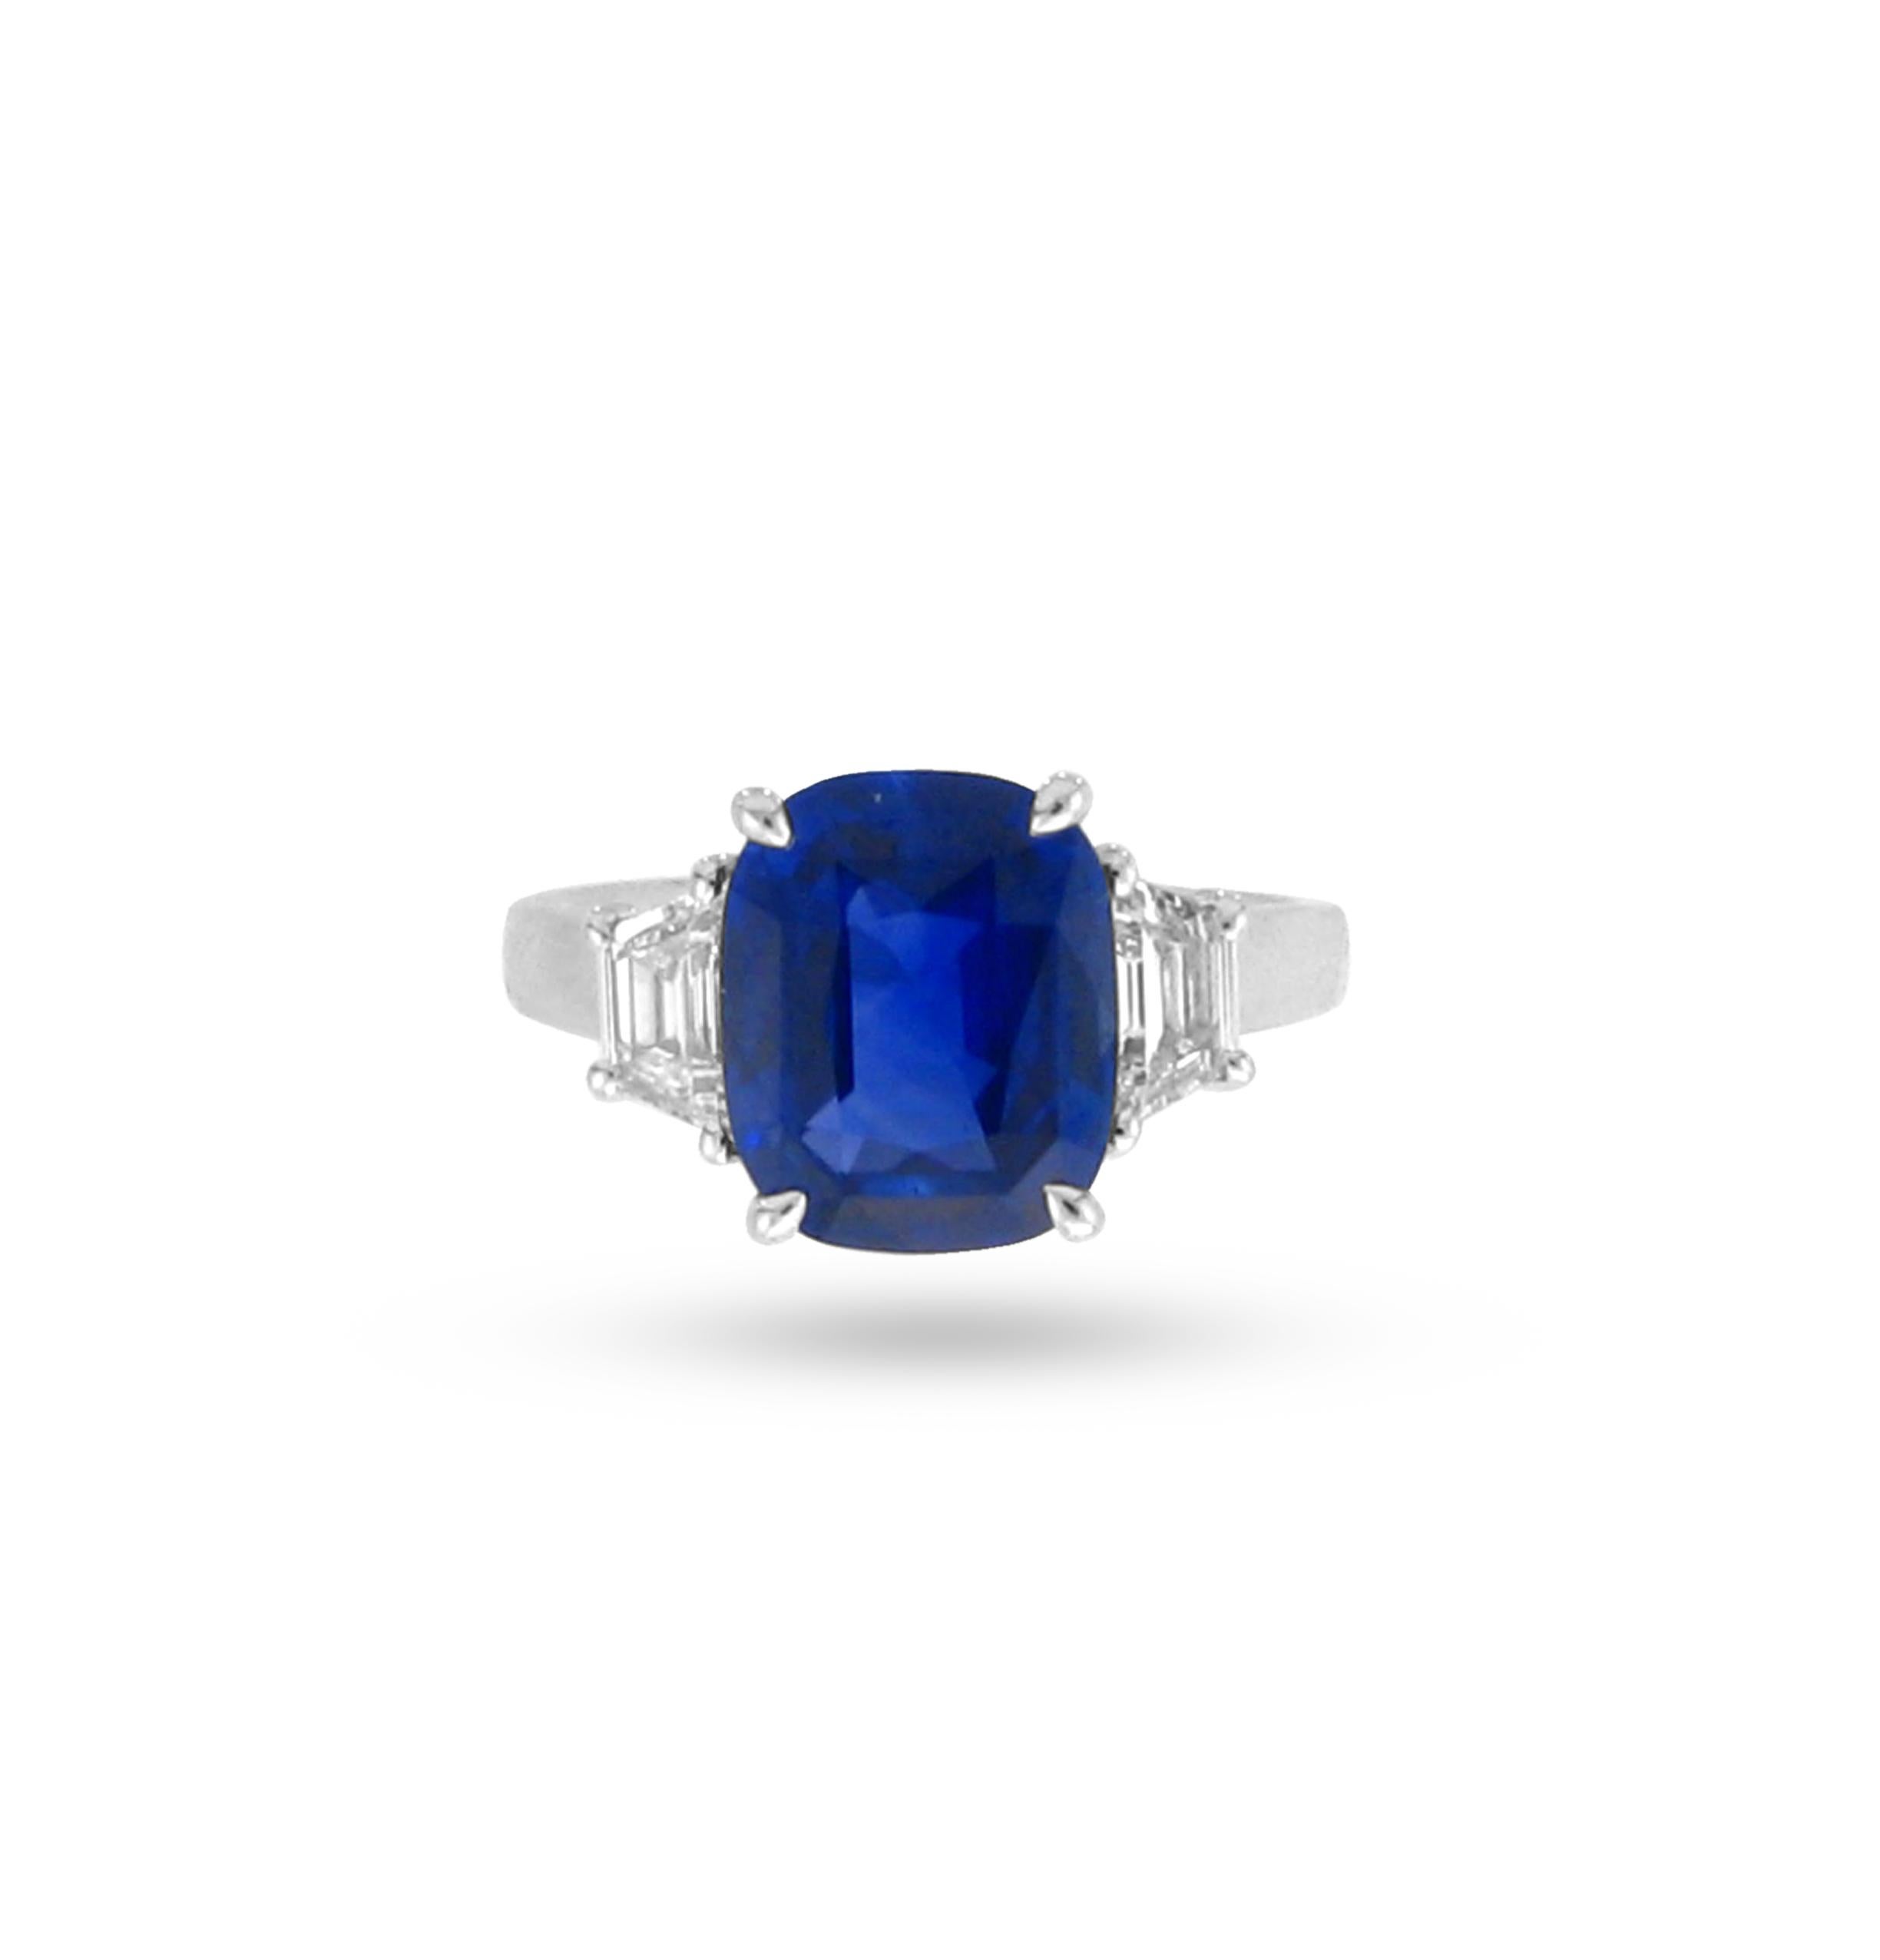 One Of Bleau NY's finest pieces. A GRS Certified Sapphire Ring complimented by two Trapezoid Diamonds.

Sapphire Cushion - 5.55ct
Trapezoid diamonds 0 .87ct
Ring Metal - Platinum